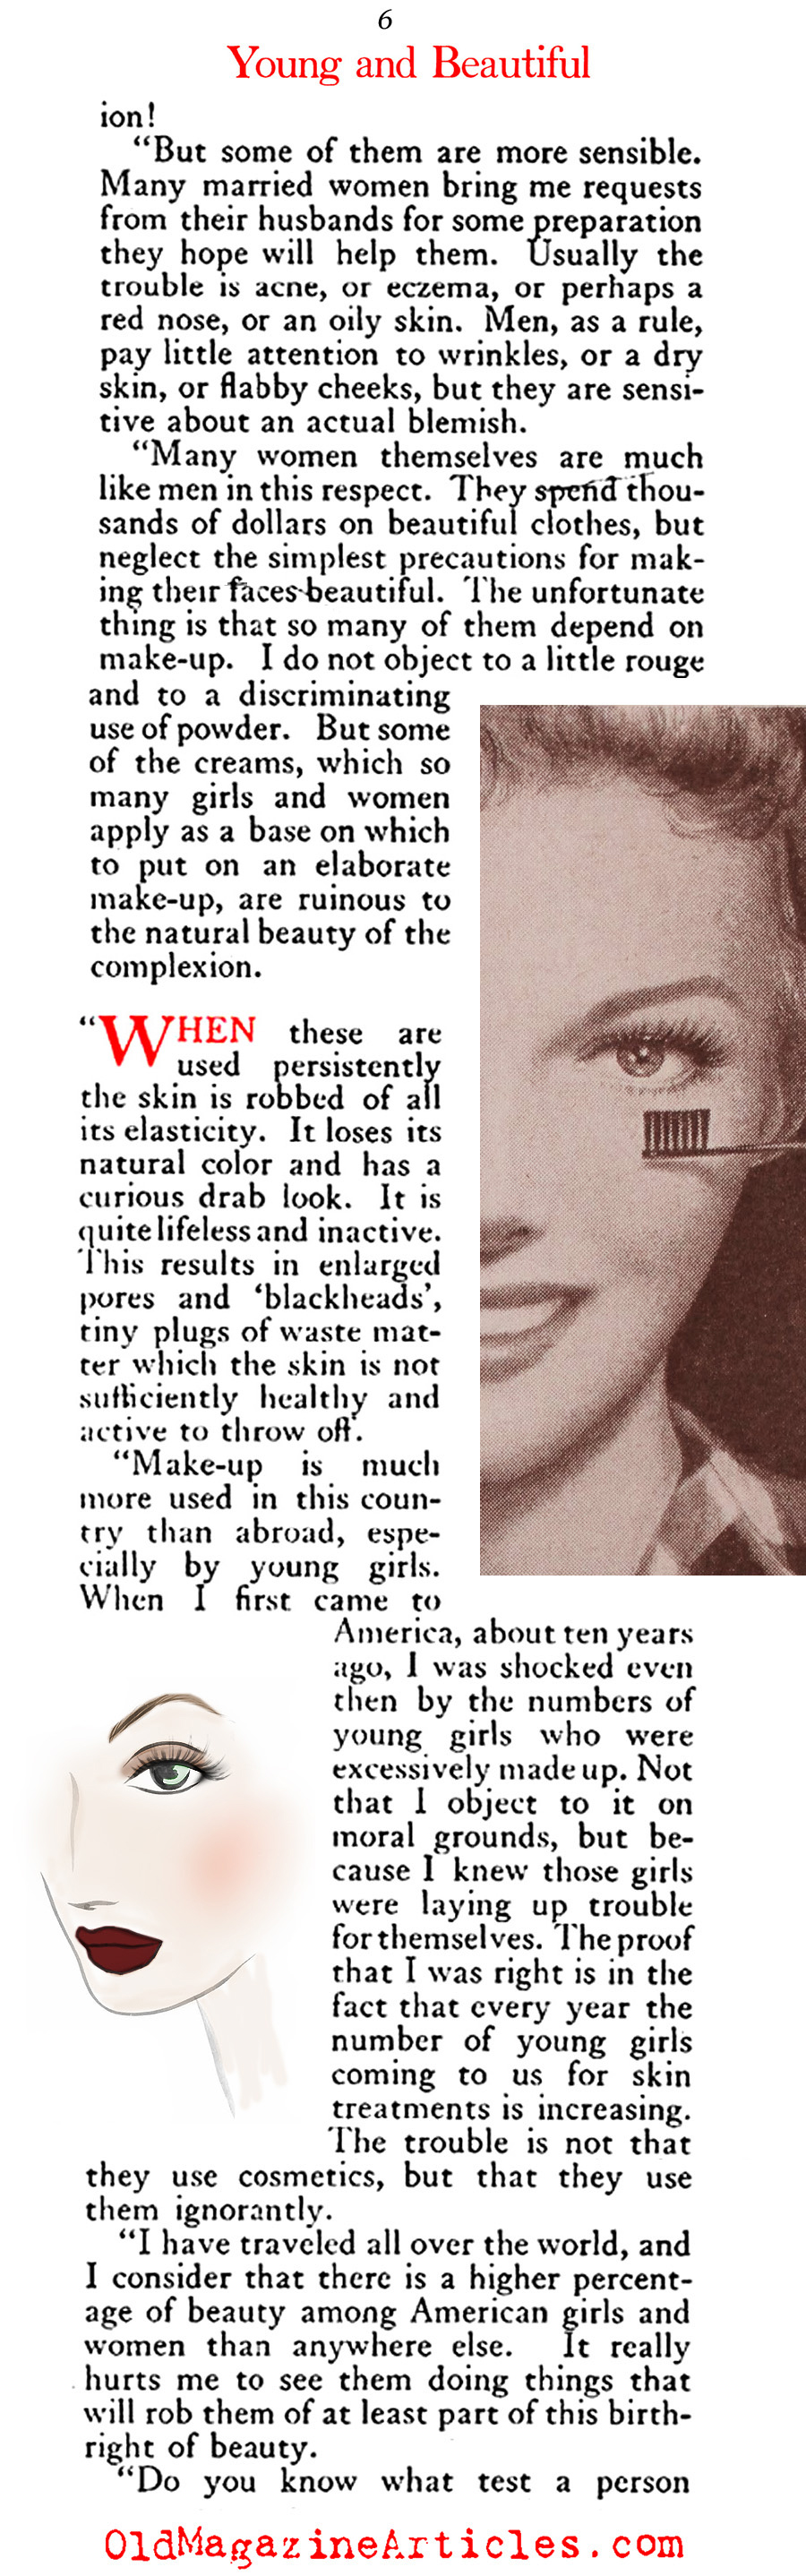 Helena Rubenstein on Youth, Beauty and Commerce (The American Magazine, 1922)